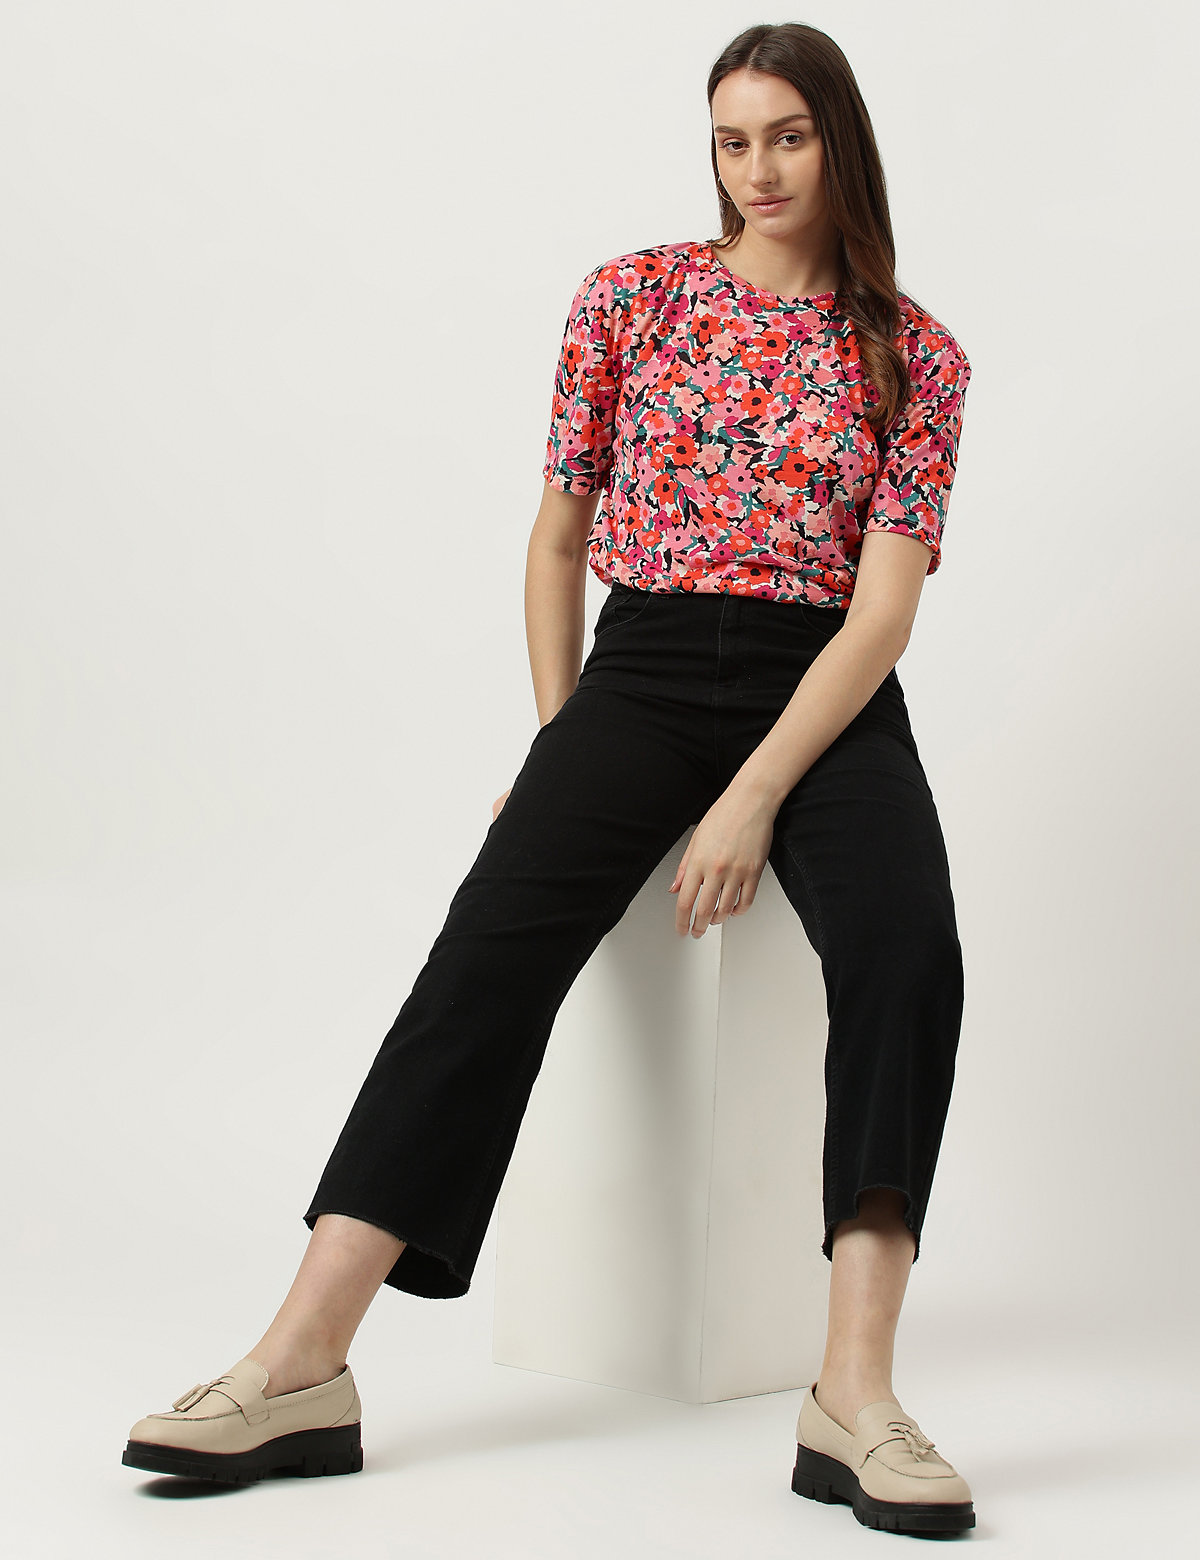 Floral Printed Round Neck T-Shirt